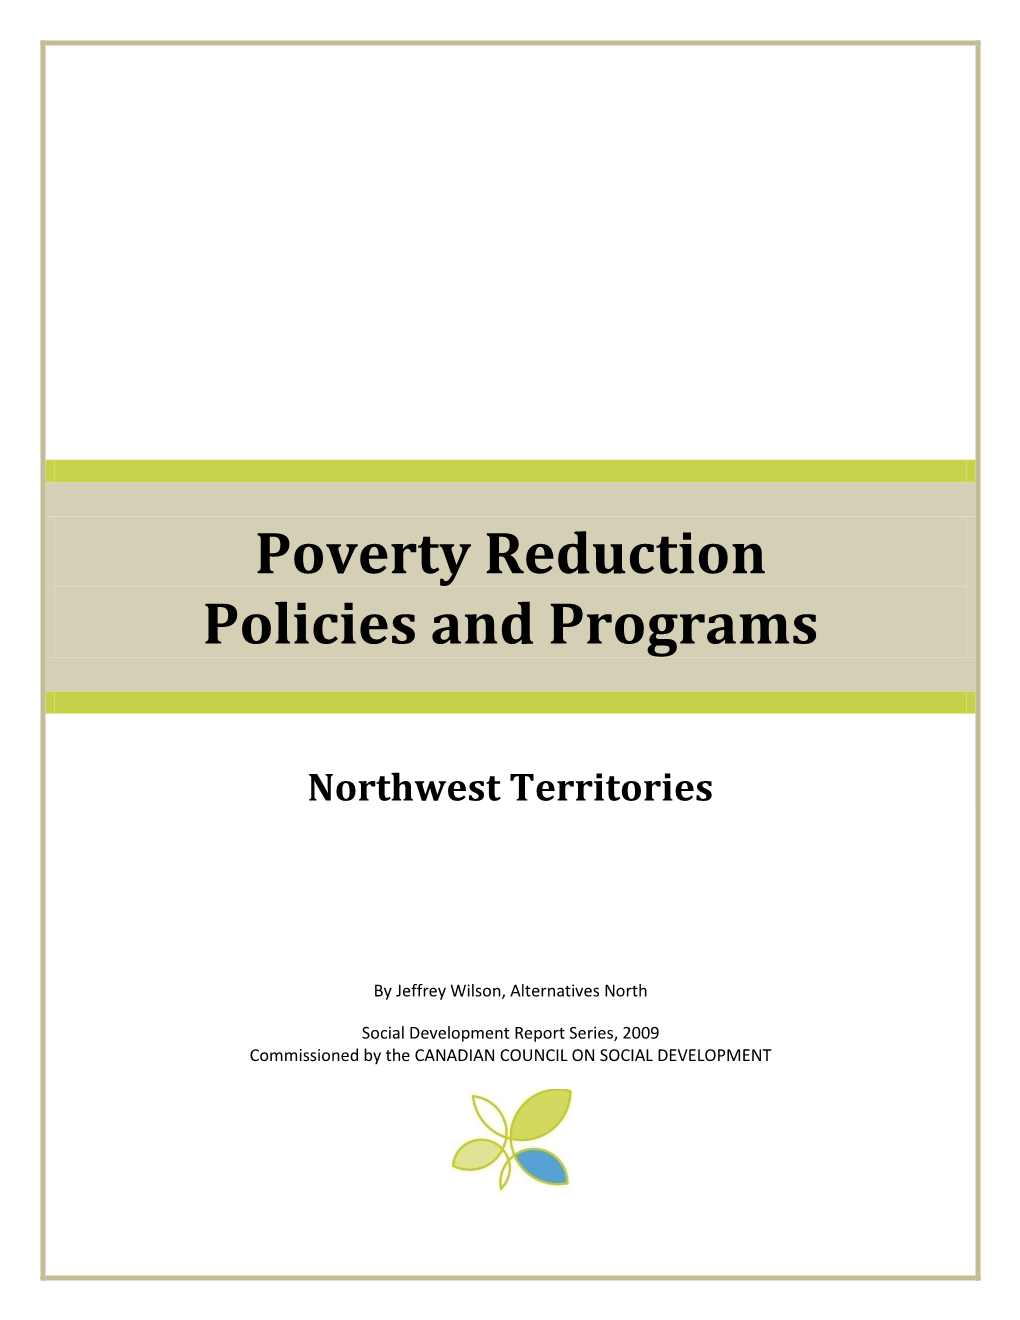 Poverty Reduction Policies and Programs